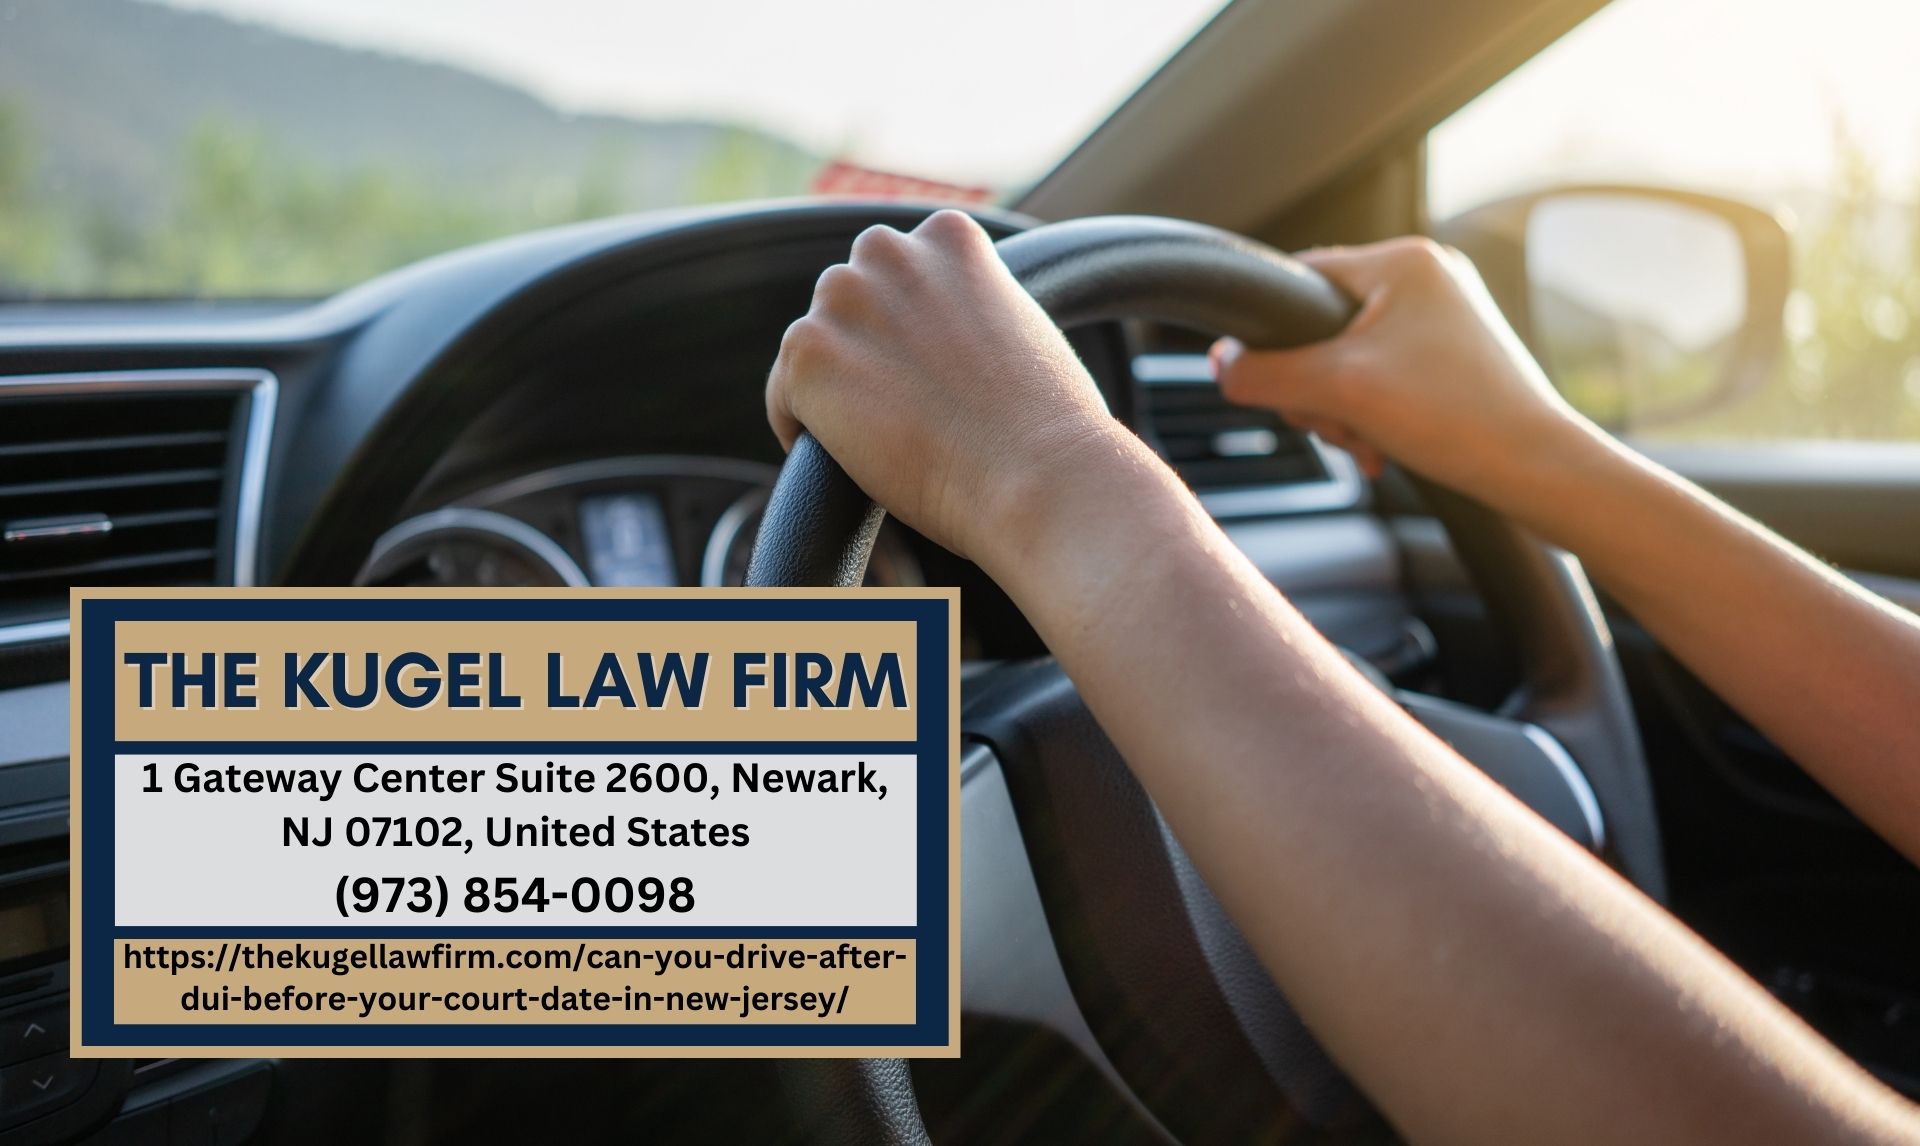 New Jersey DWI Lawyer Rachel Kugel Releases Insightful Article on Driving After DUI Before Court Date